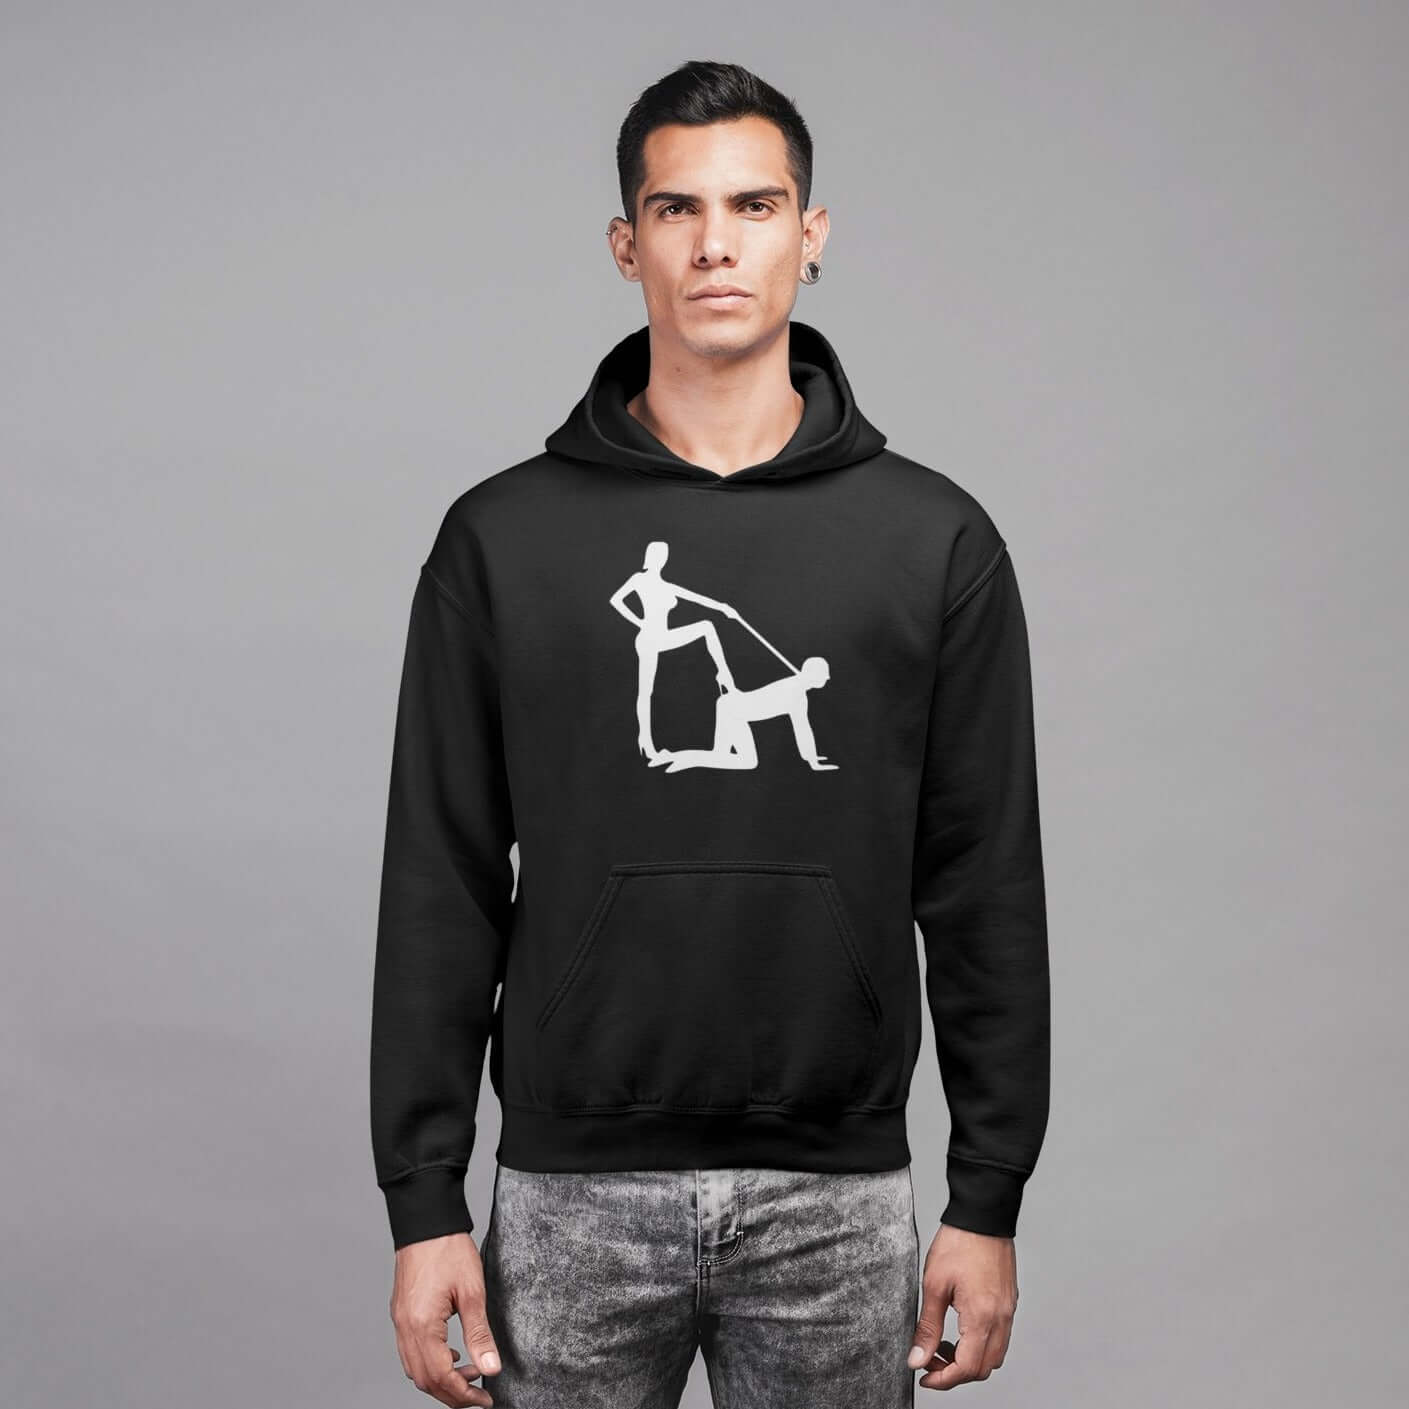 Man wearing a black hooded sweatshirt with silhouette image of a man on his hands and knees and a dominatrix holding his leash printed on the front.